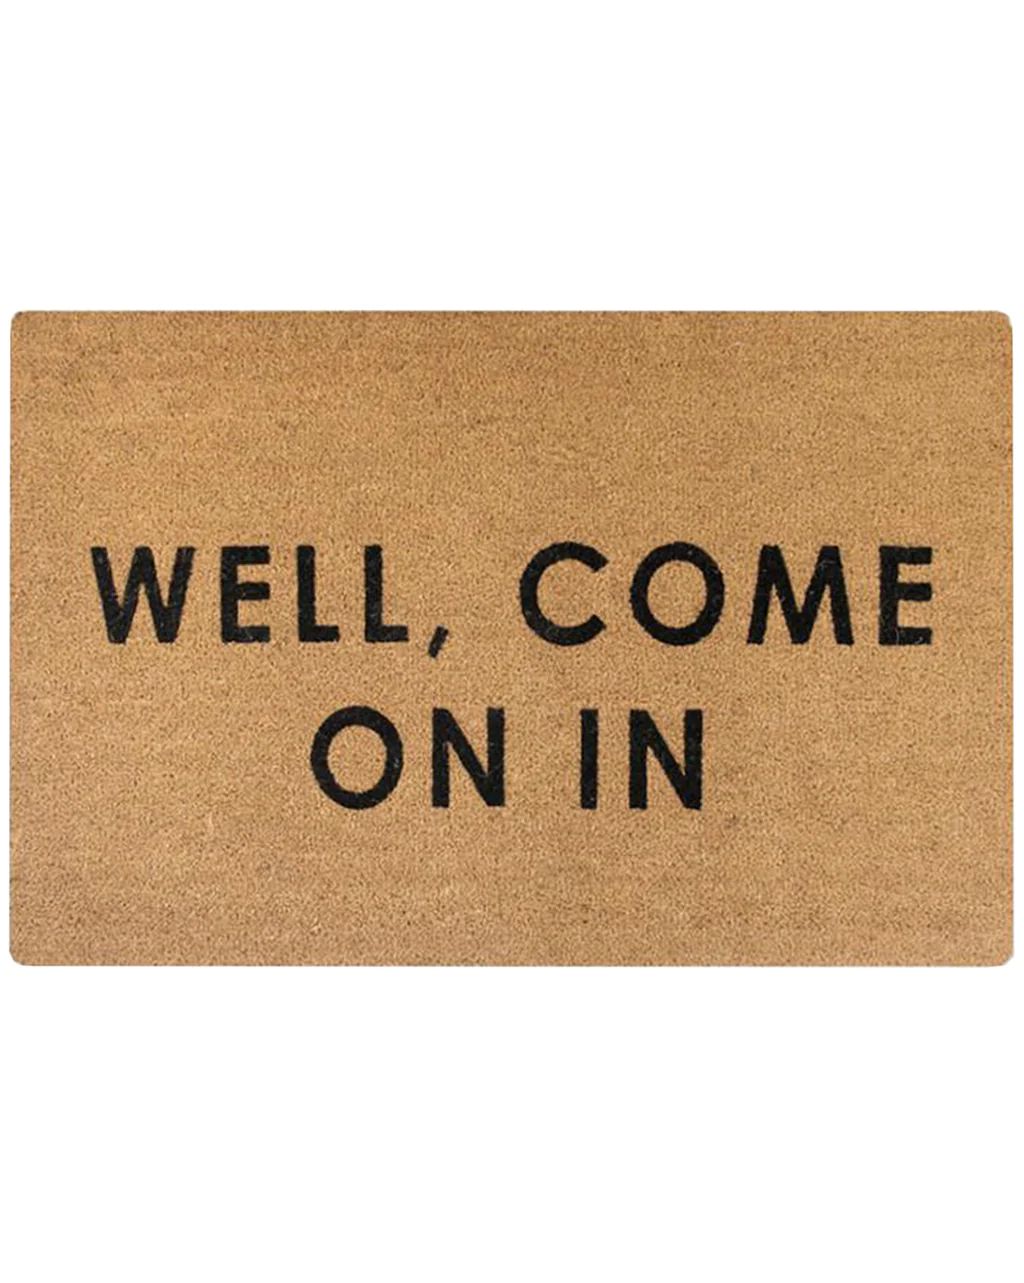 Well, Come On In Doormat | McGee & Co.